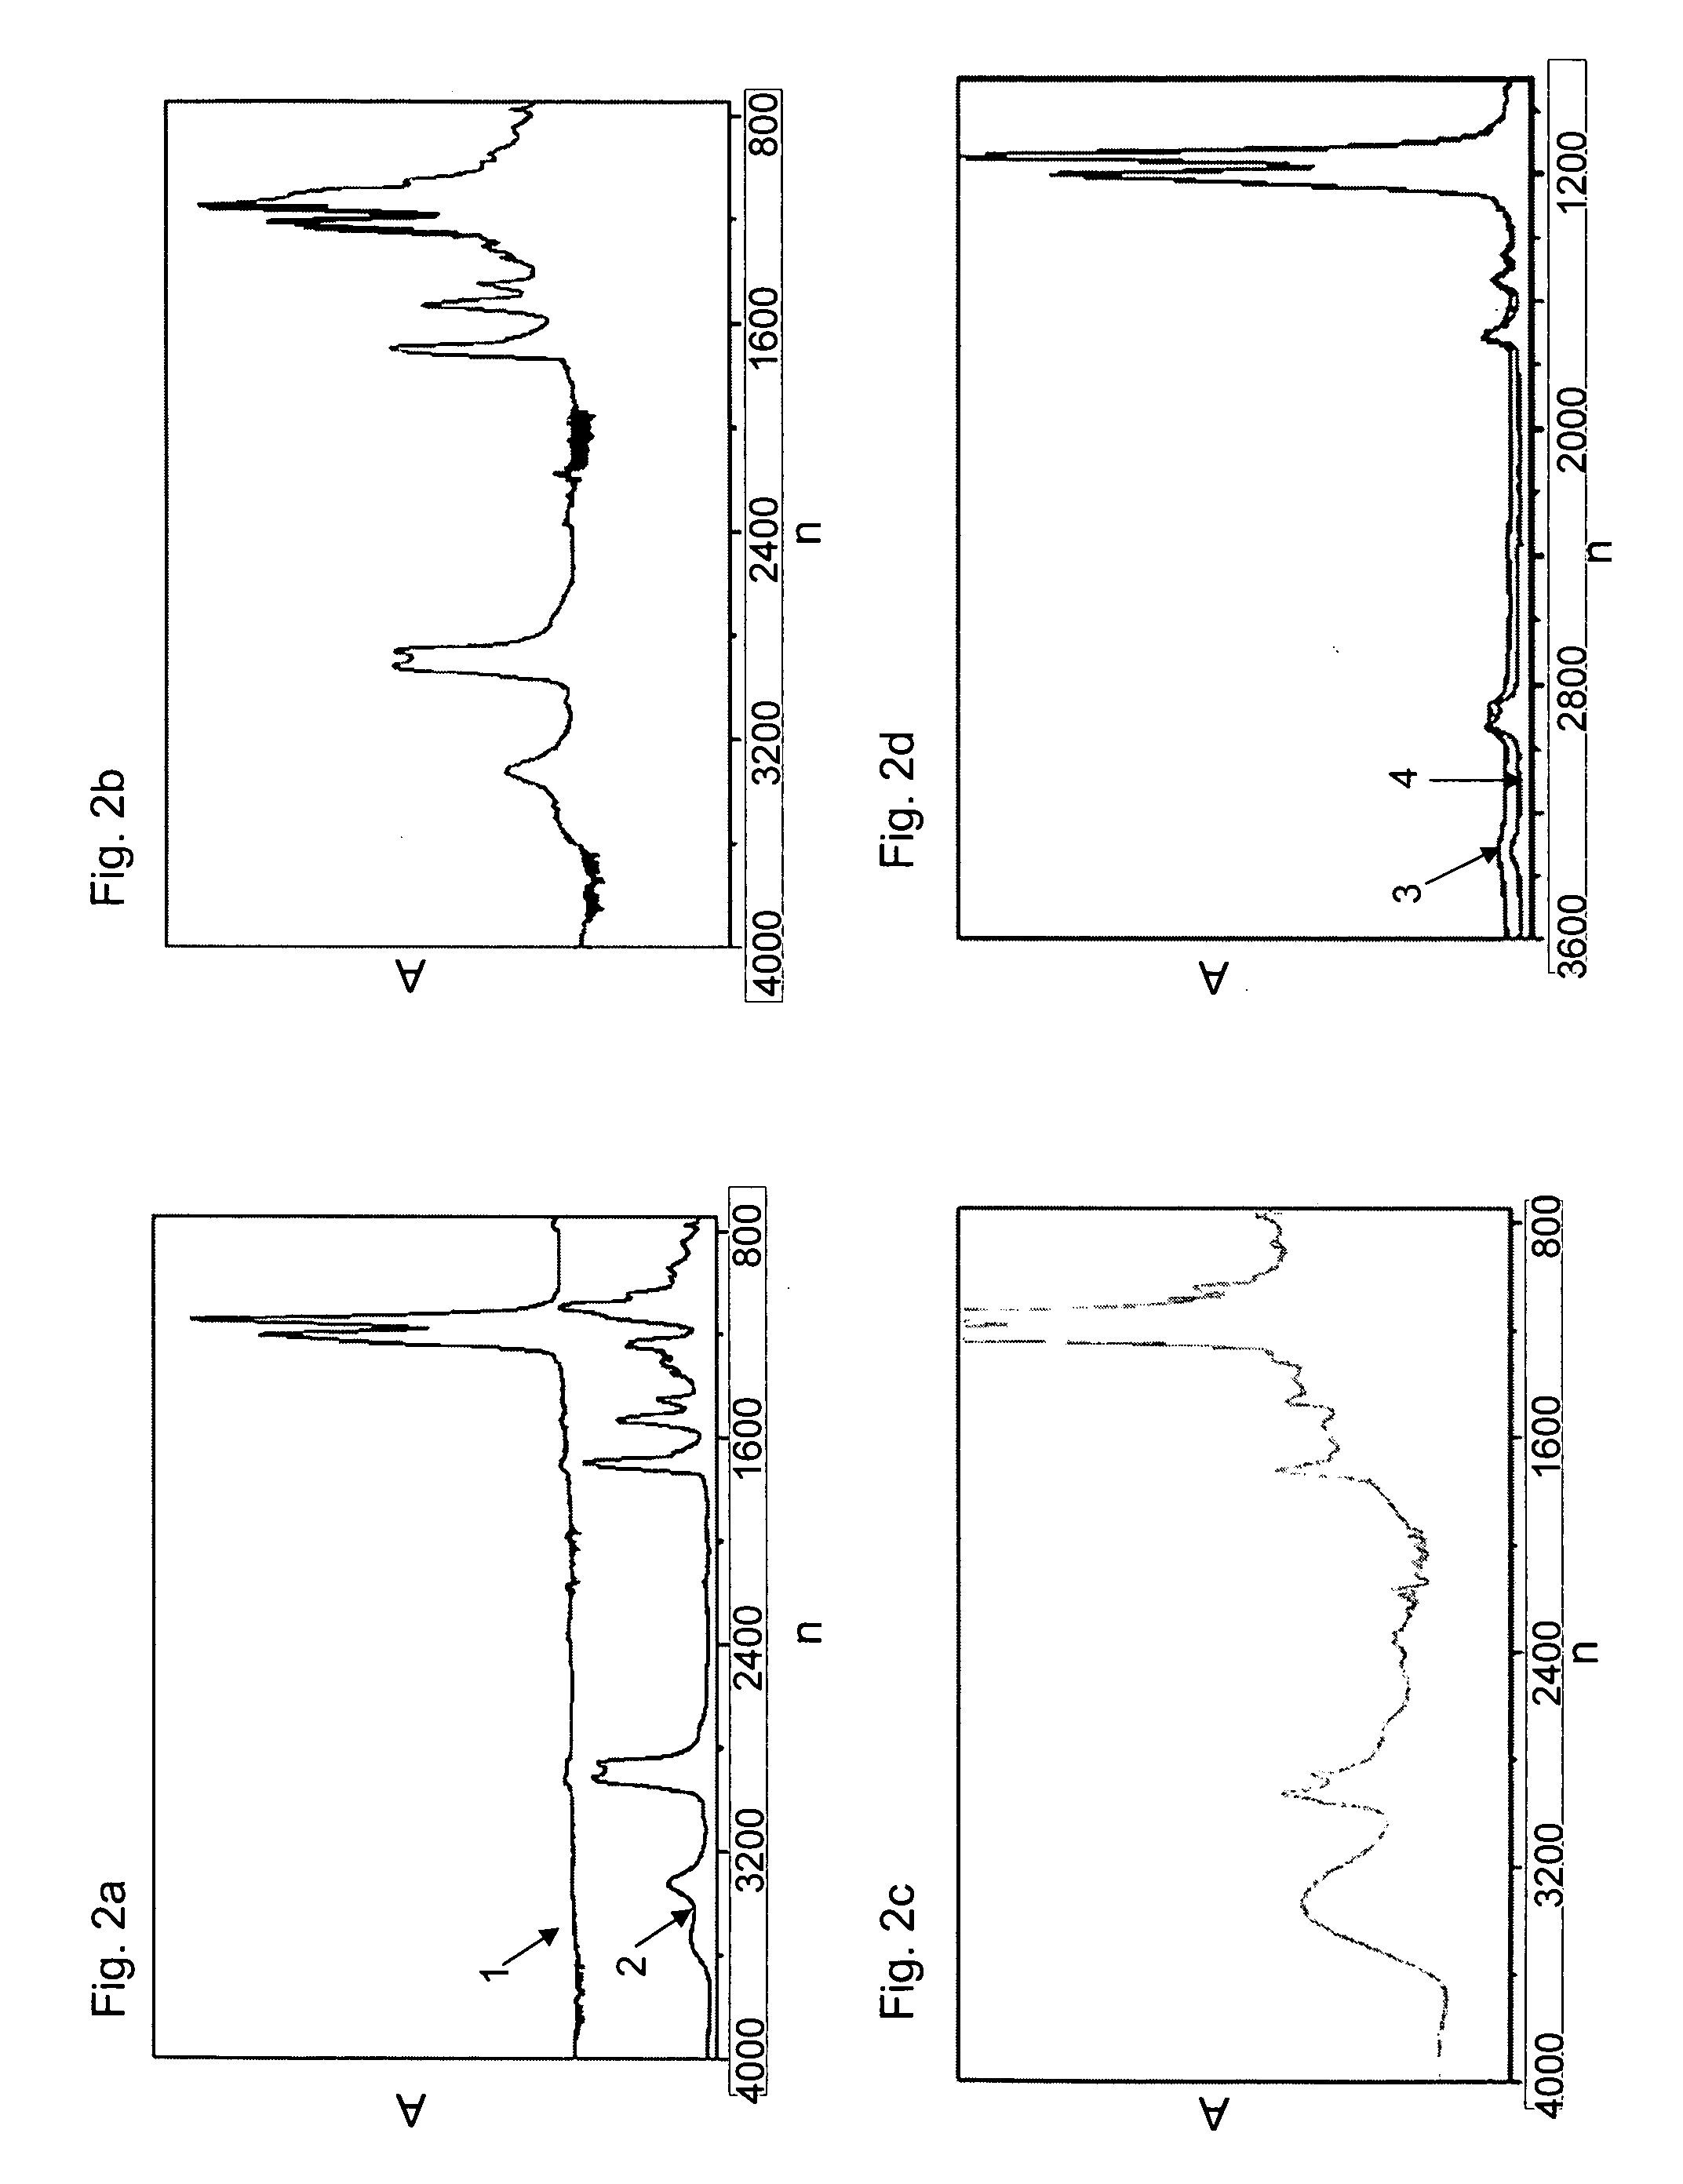 Electrochemical gas sensor with a hydrophilic membrane coating